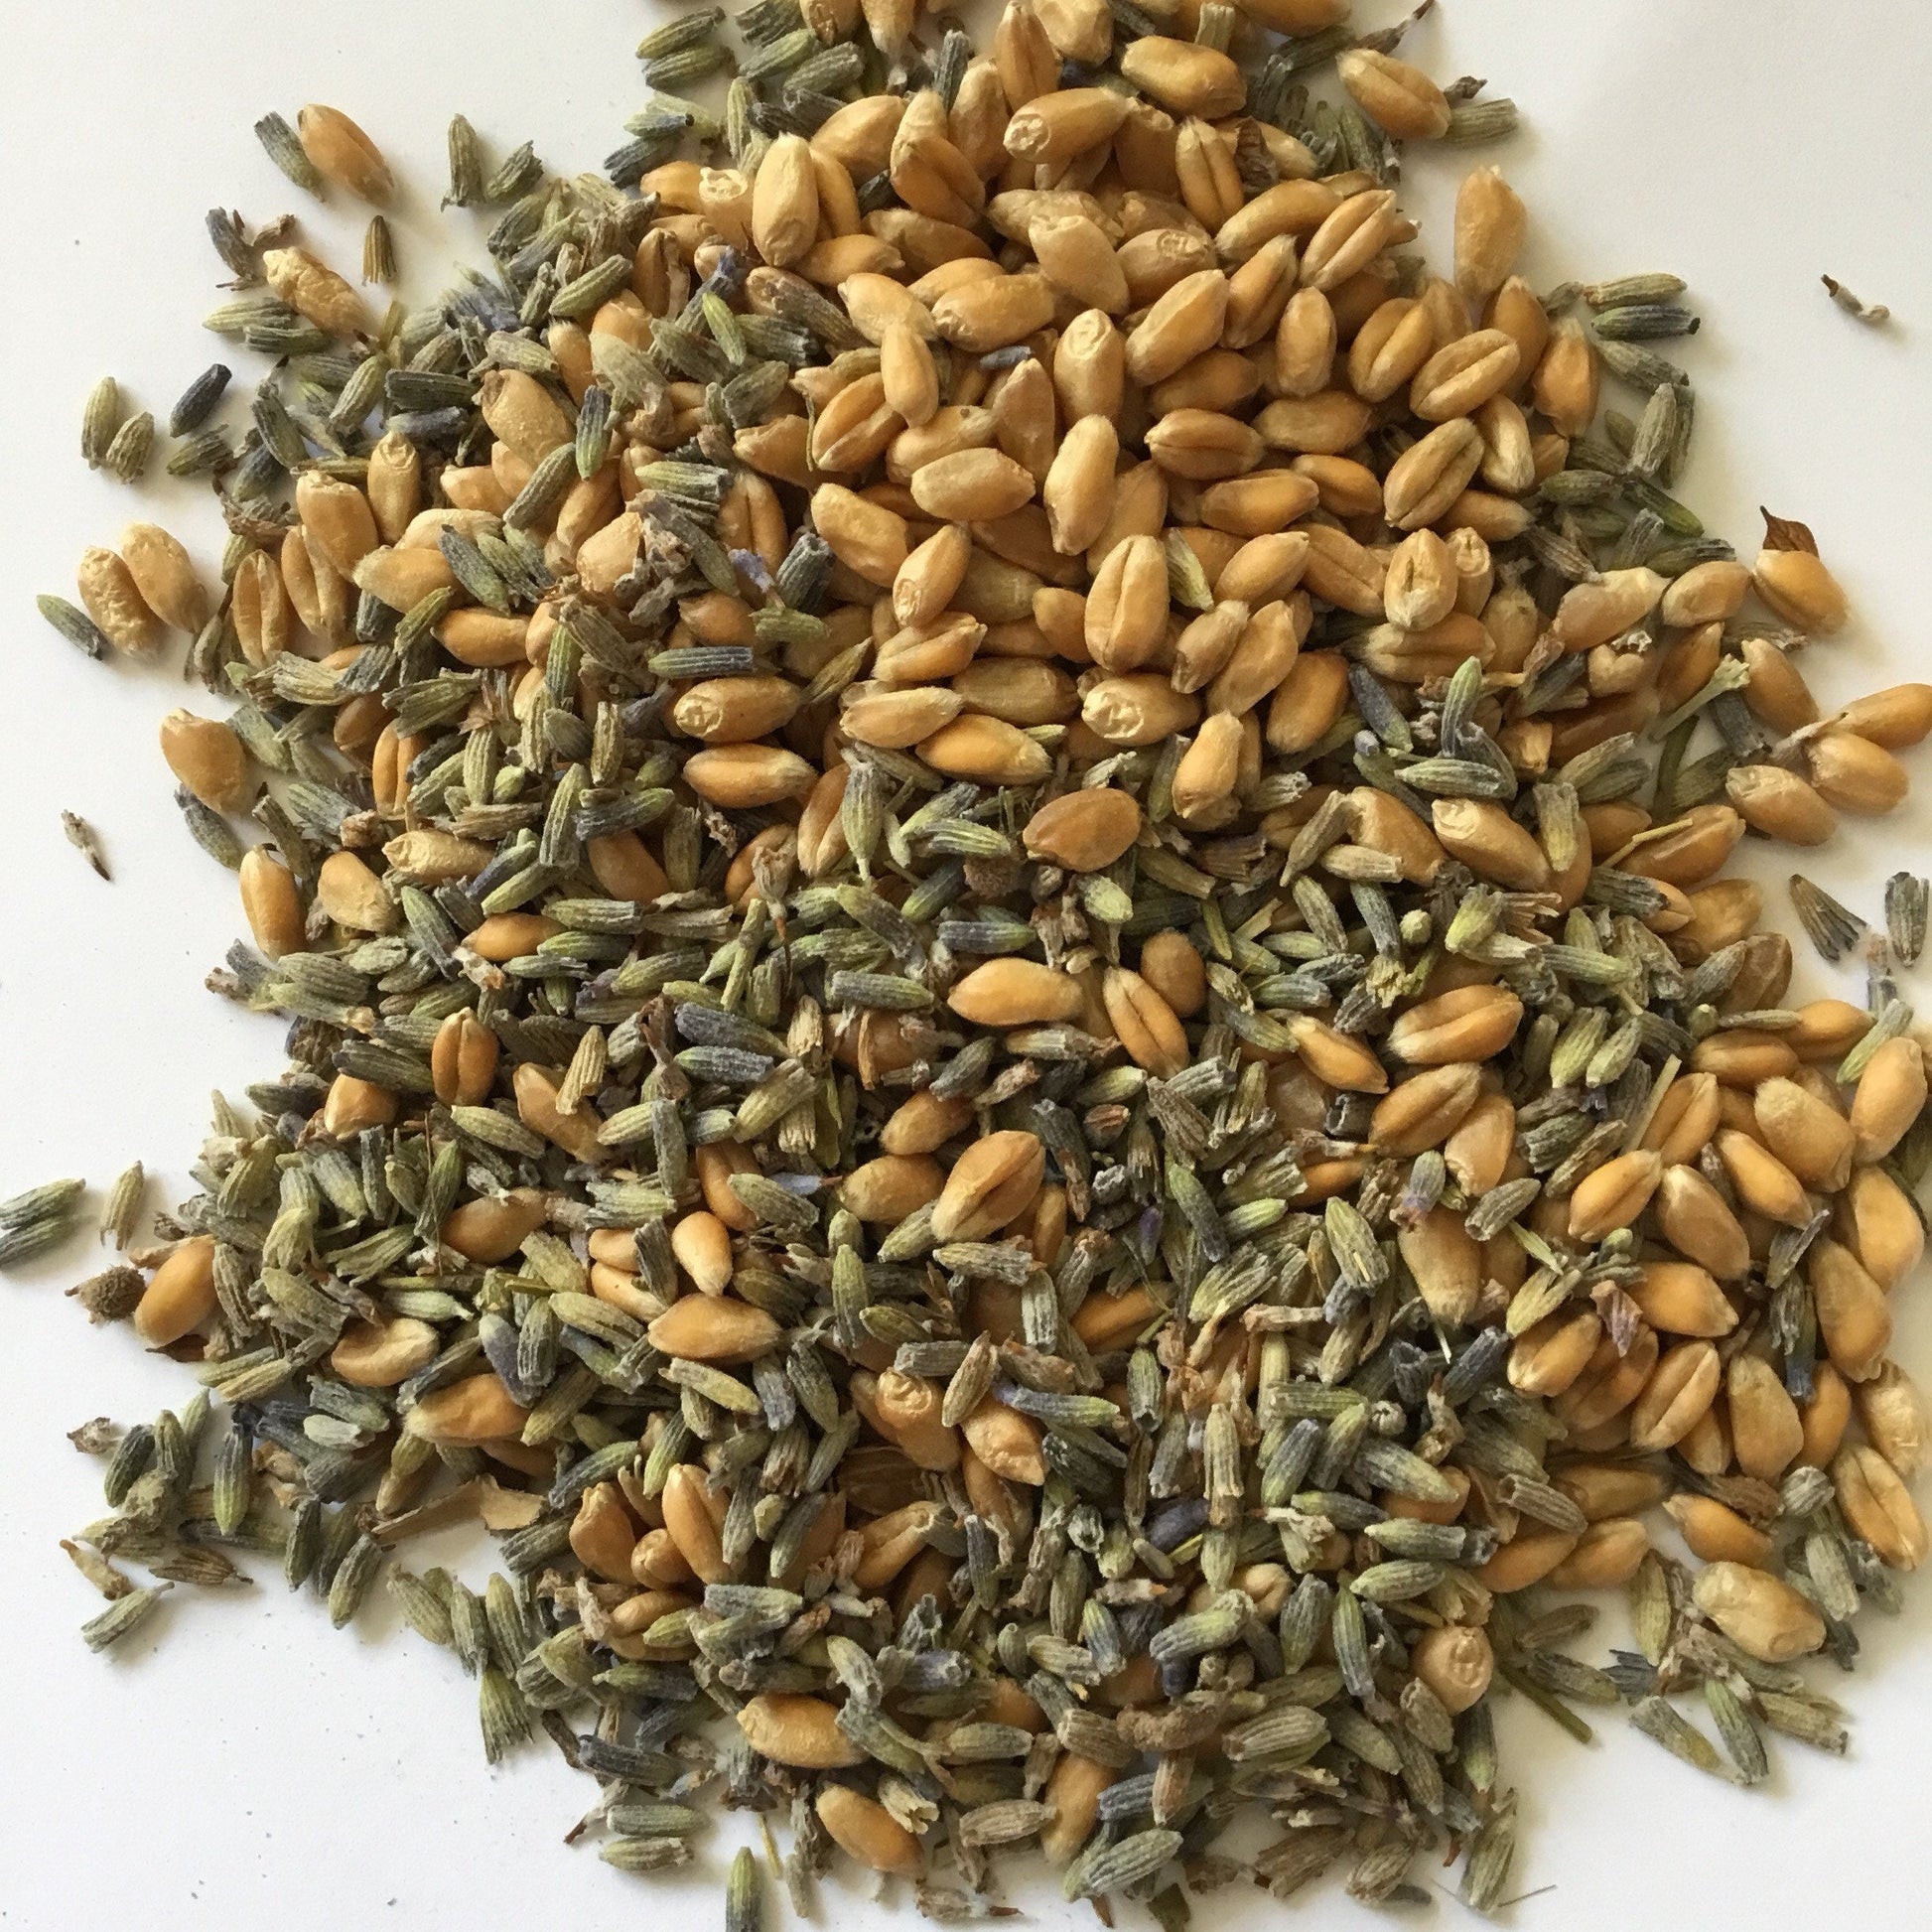 English lavender, Somerset whole wheat. Wheat bag ingredients for daily wellbeing 